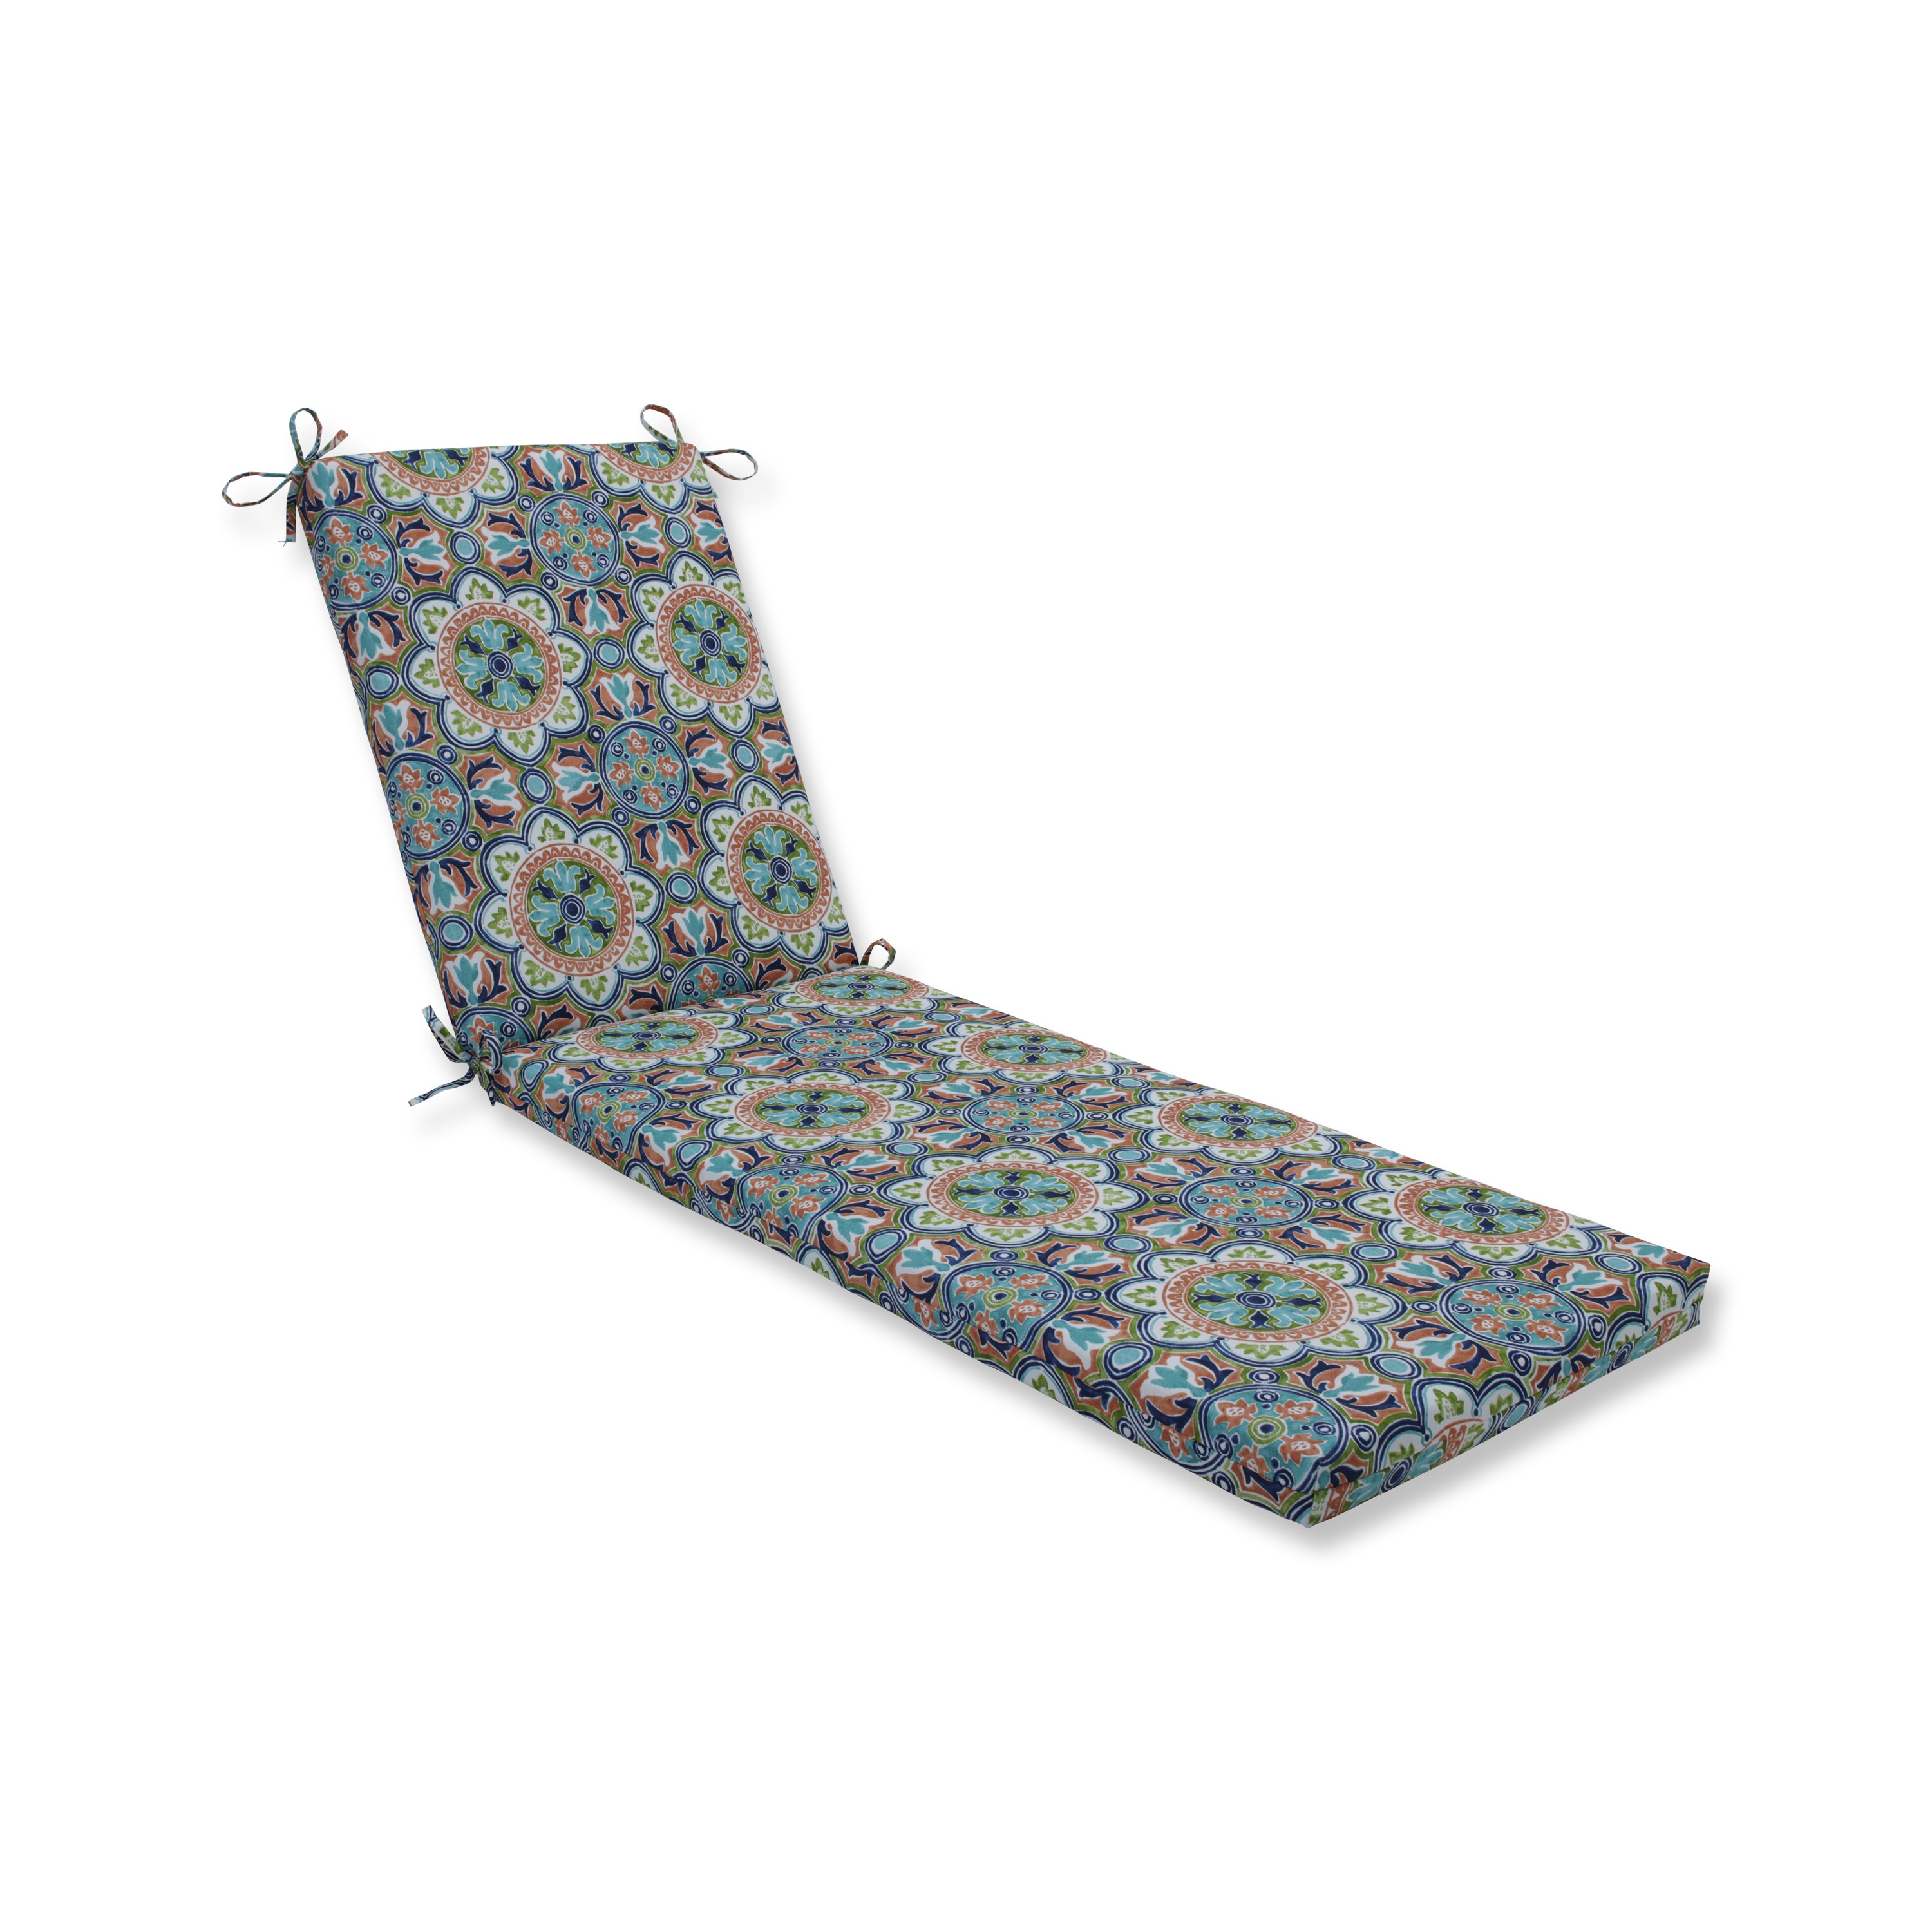 80" Blue and Green Chaise Lounge Cushion with Ties - image 2 of 3